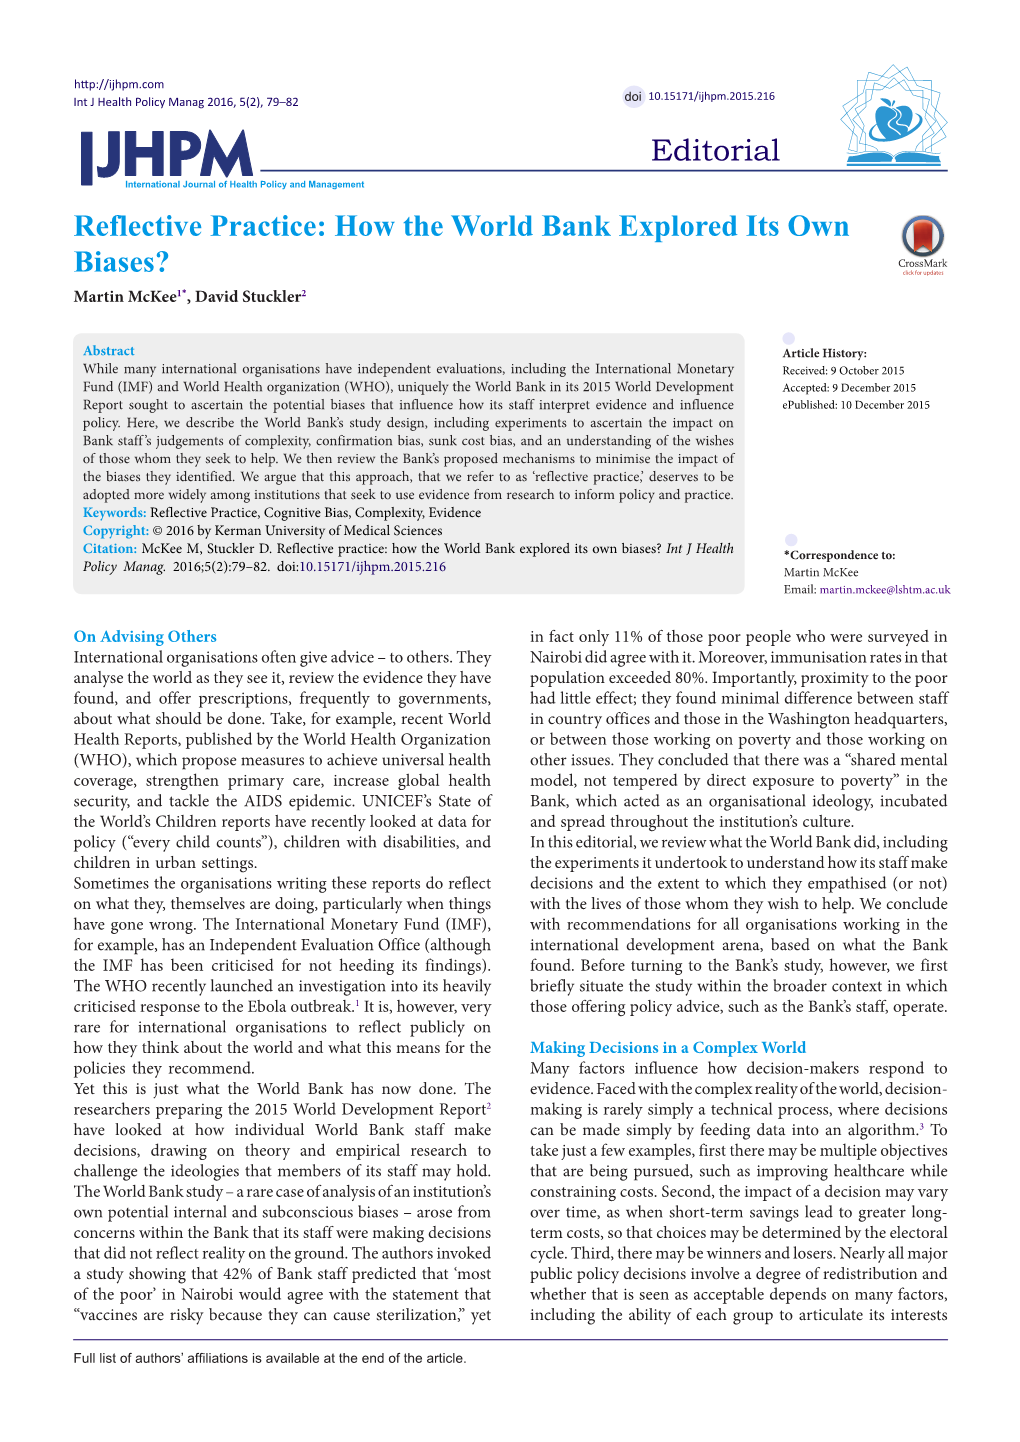 Reflective Practice: How the World Bank Explored Its Own Biases? Martin Mckee1*, David Stuckler2